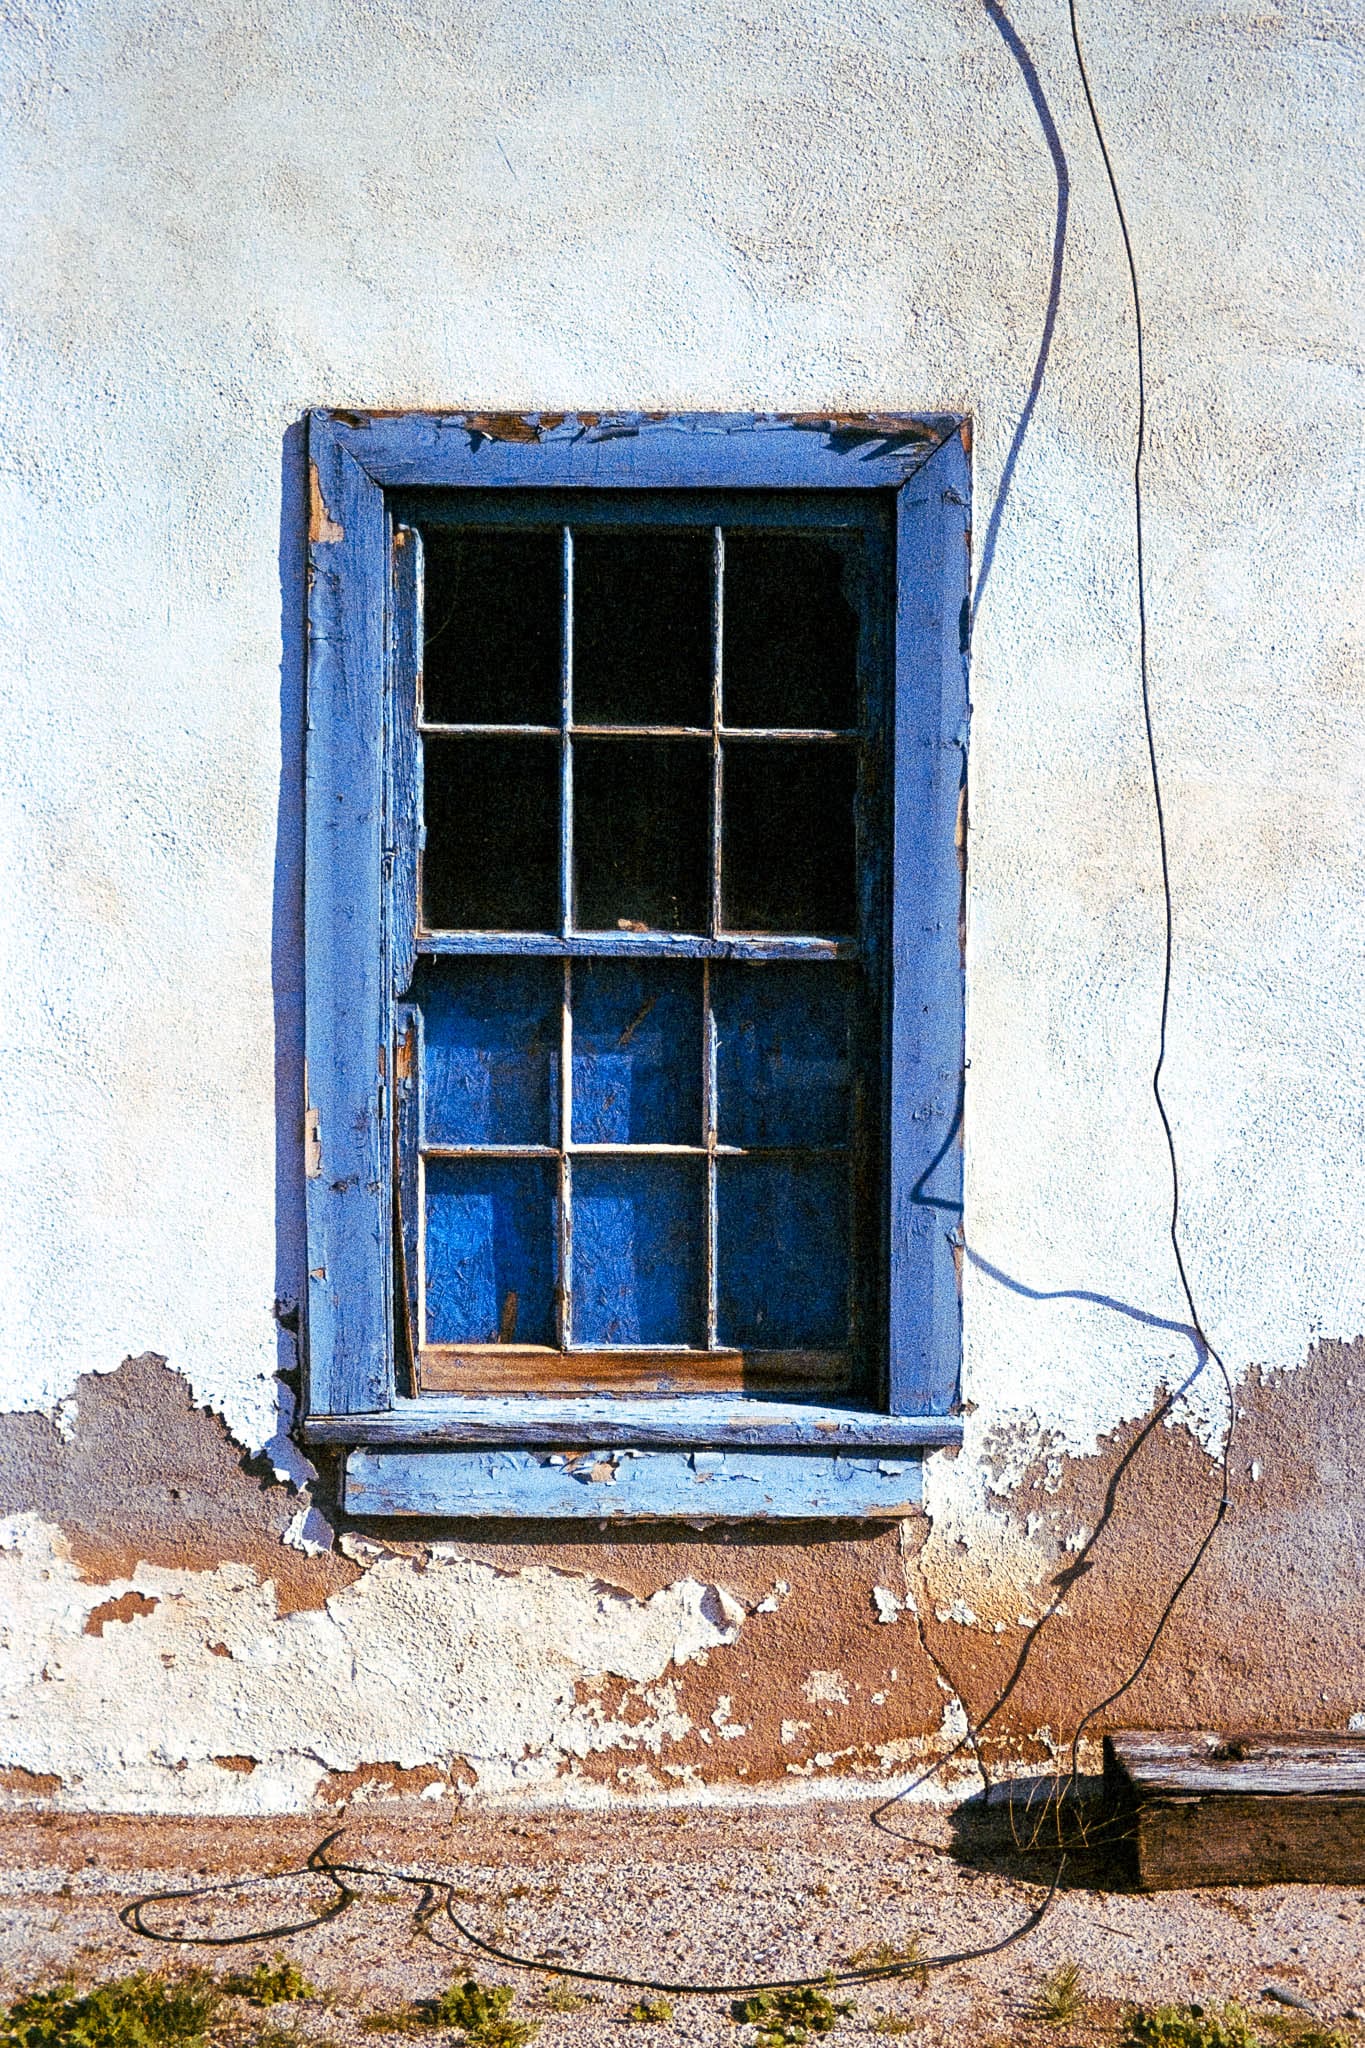 Daytime view of a rustic, faded blue window on a decaying wall with a single black wire.